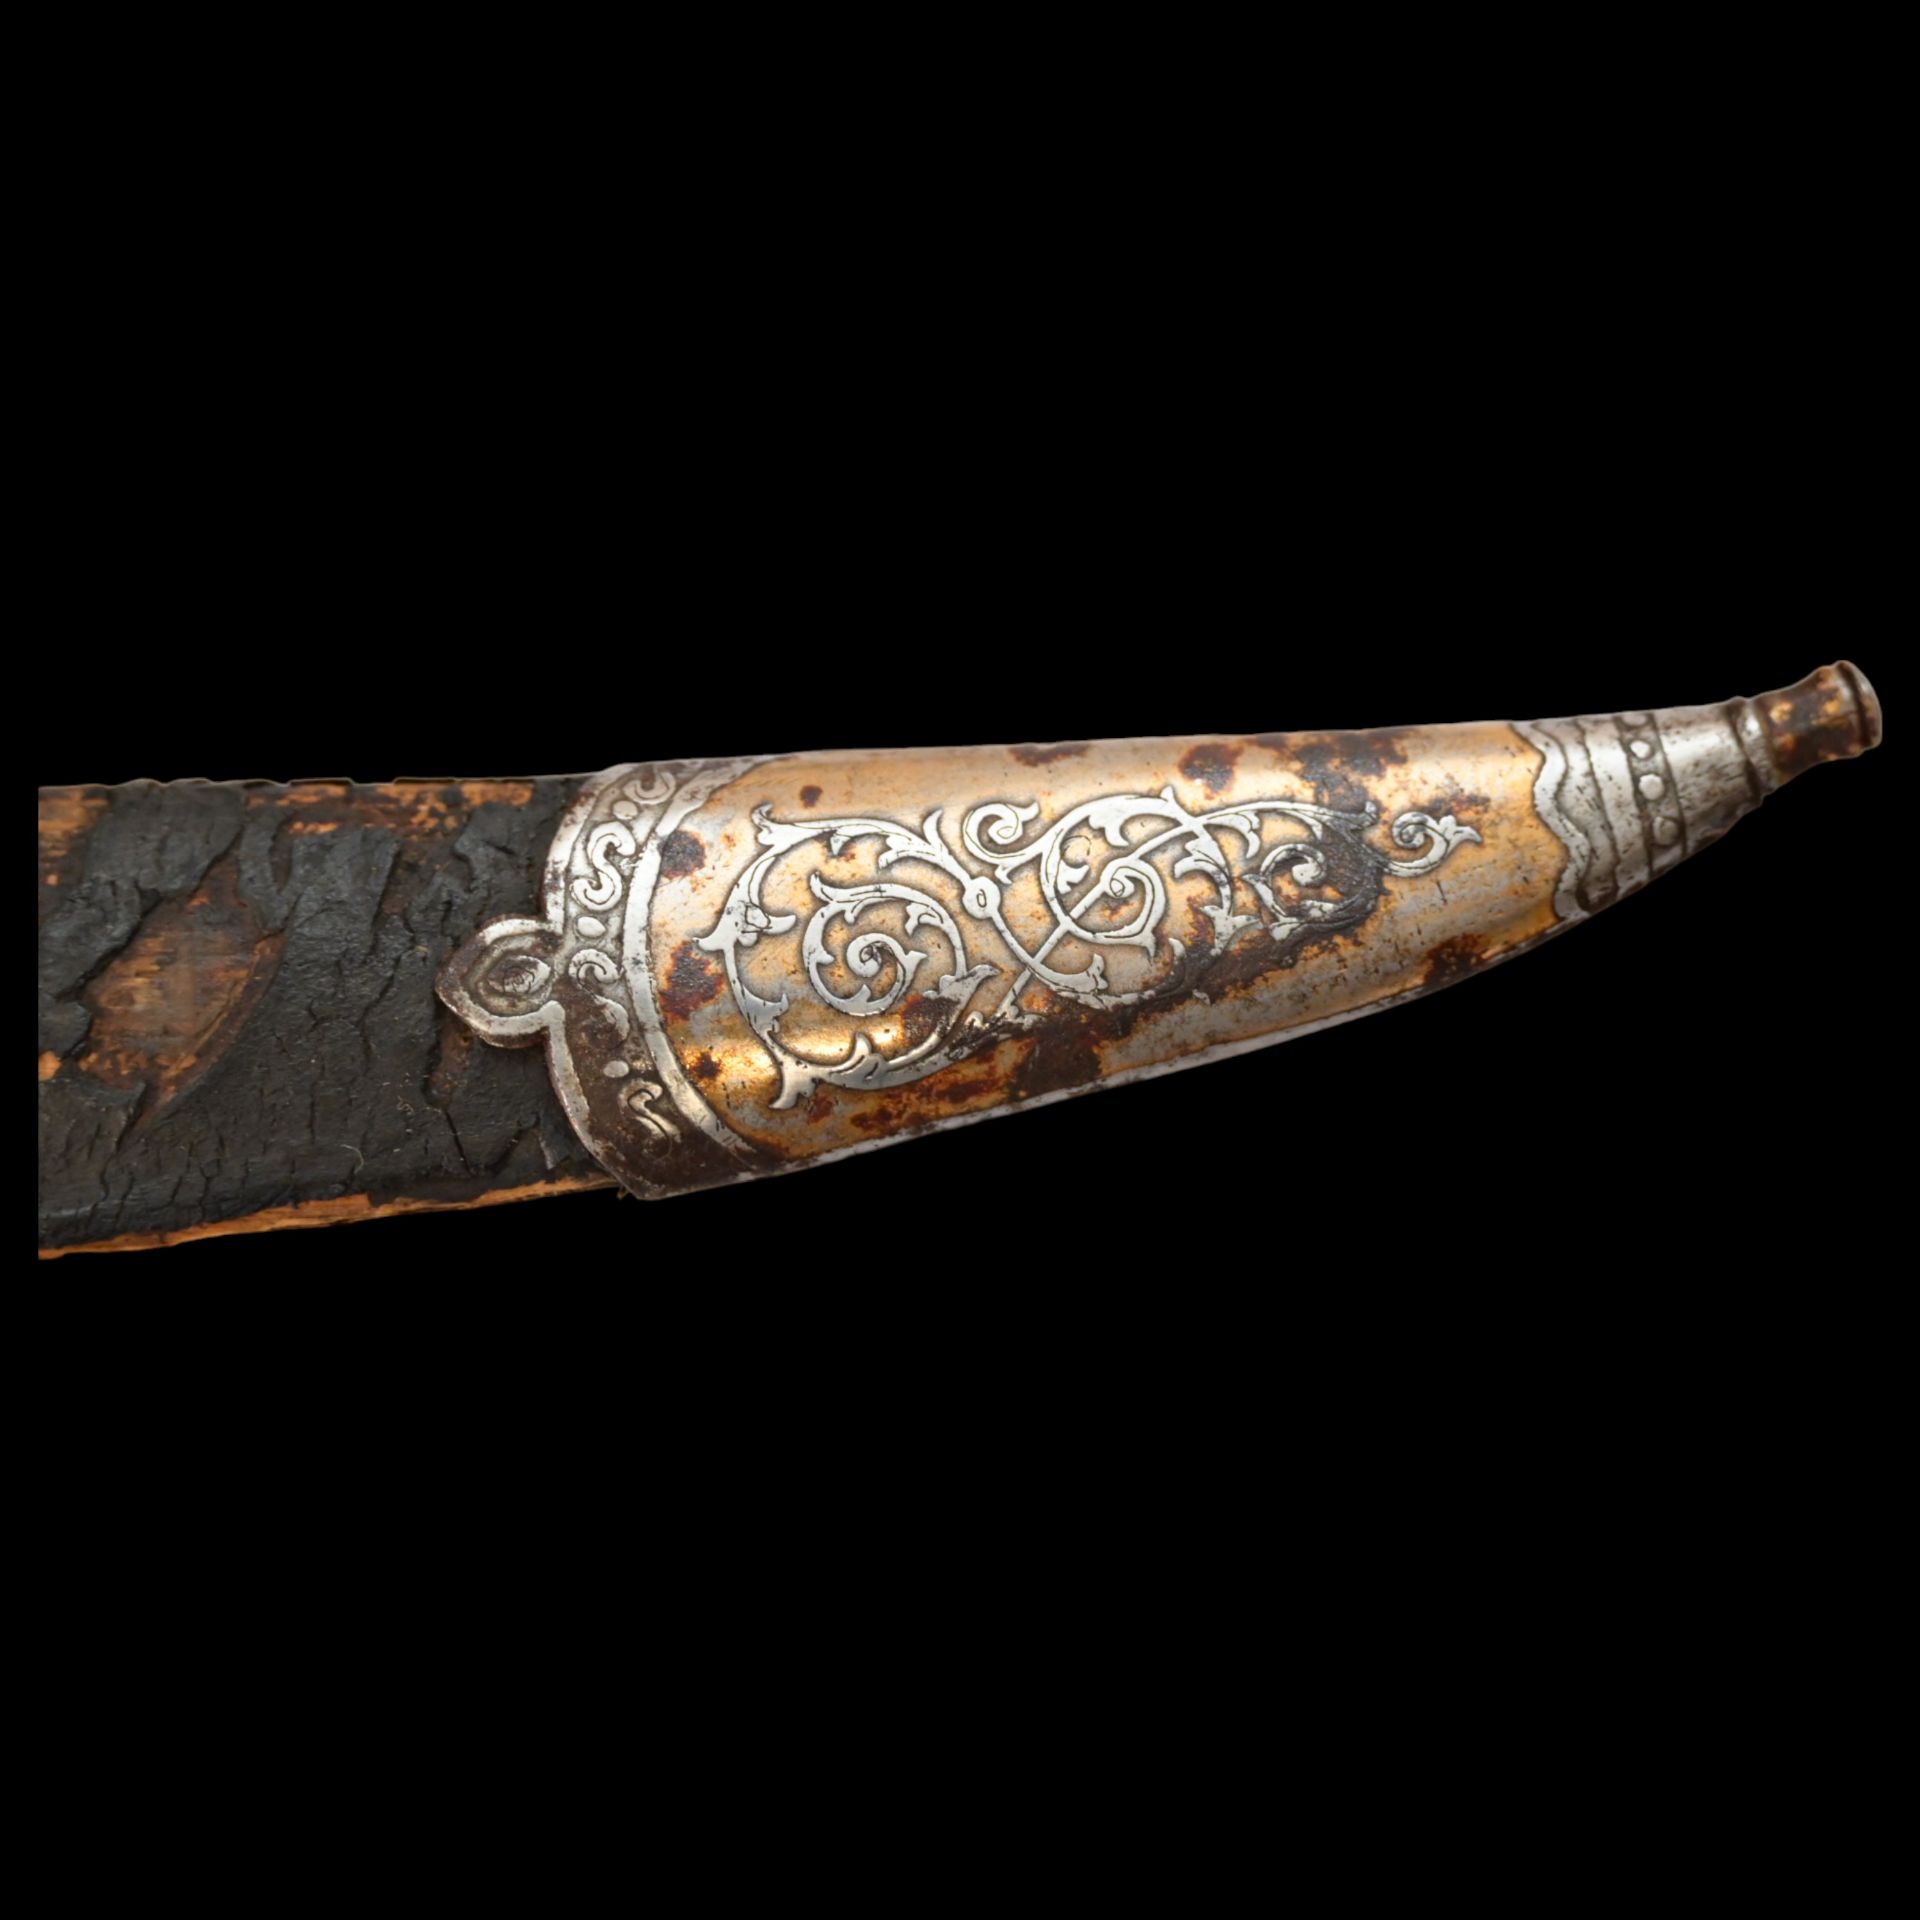 RARE HUNTING KNIFE, DECORATED WITH GOLD AND BLUE, RUSSIAN EMPIRE, ZLATOUST, 1889. - Image 6 of 26